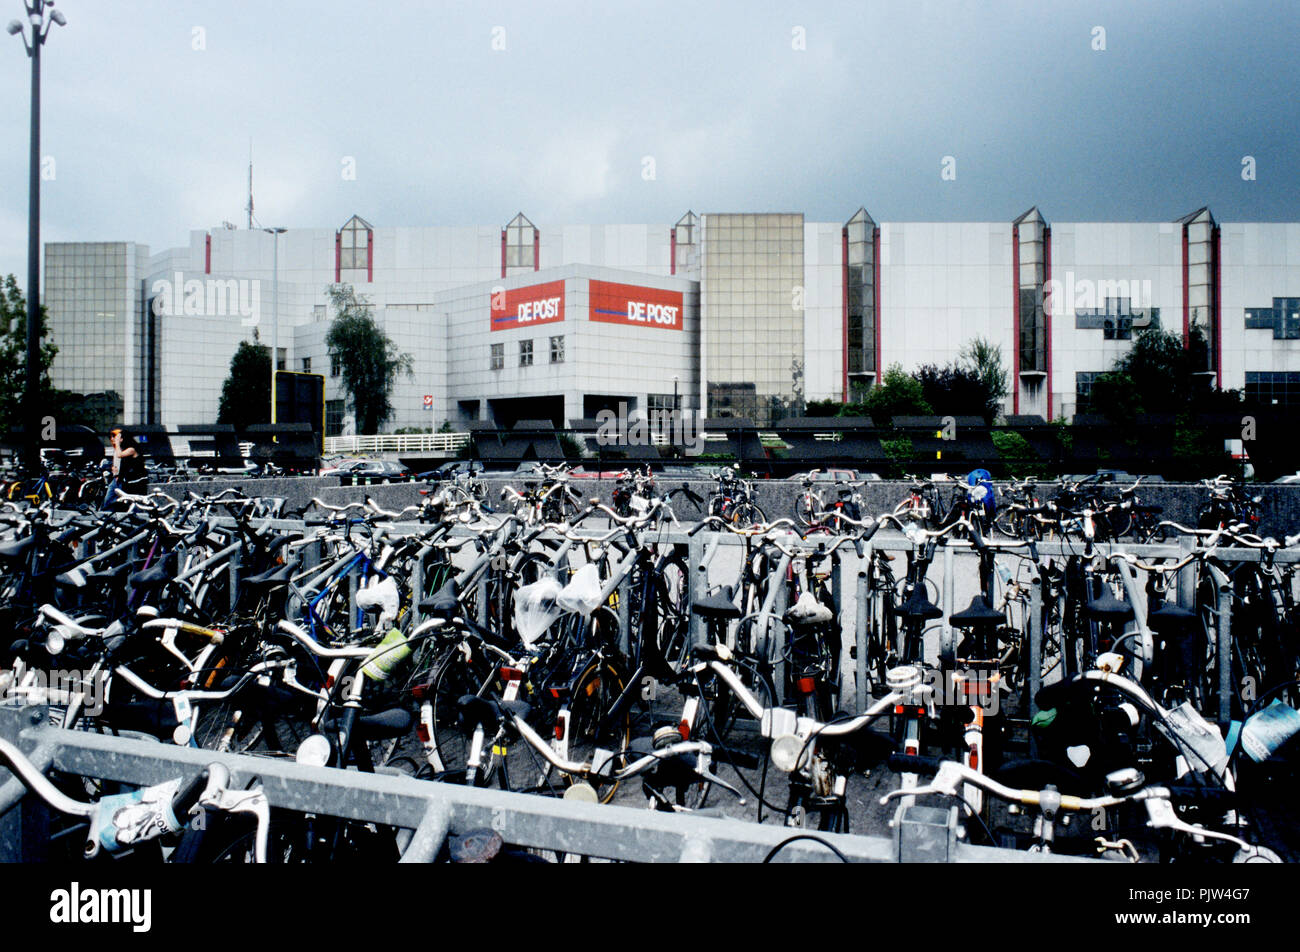 Bicycle parking space and the old "De Post" sorting centre at Antwerp  Berchem station (31/08/2006 Stock Photo - Alamy